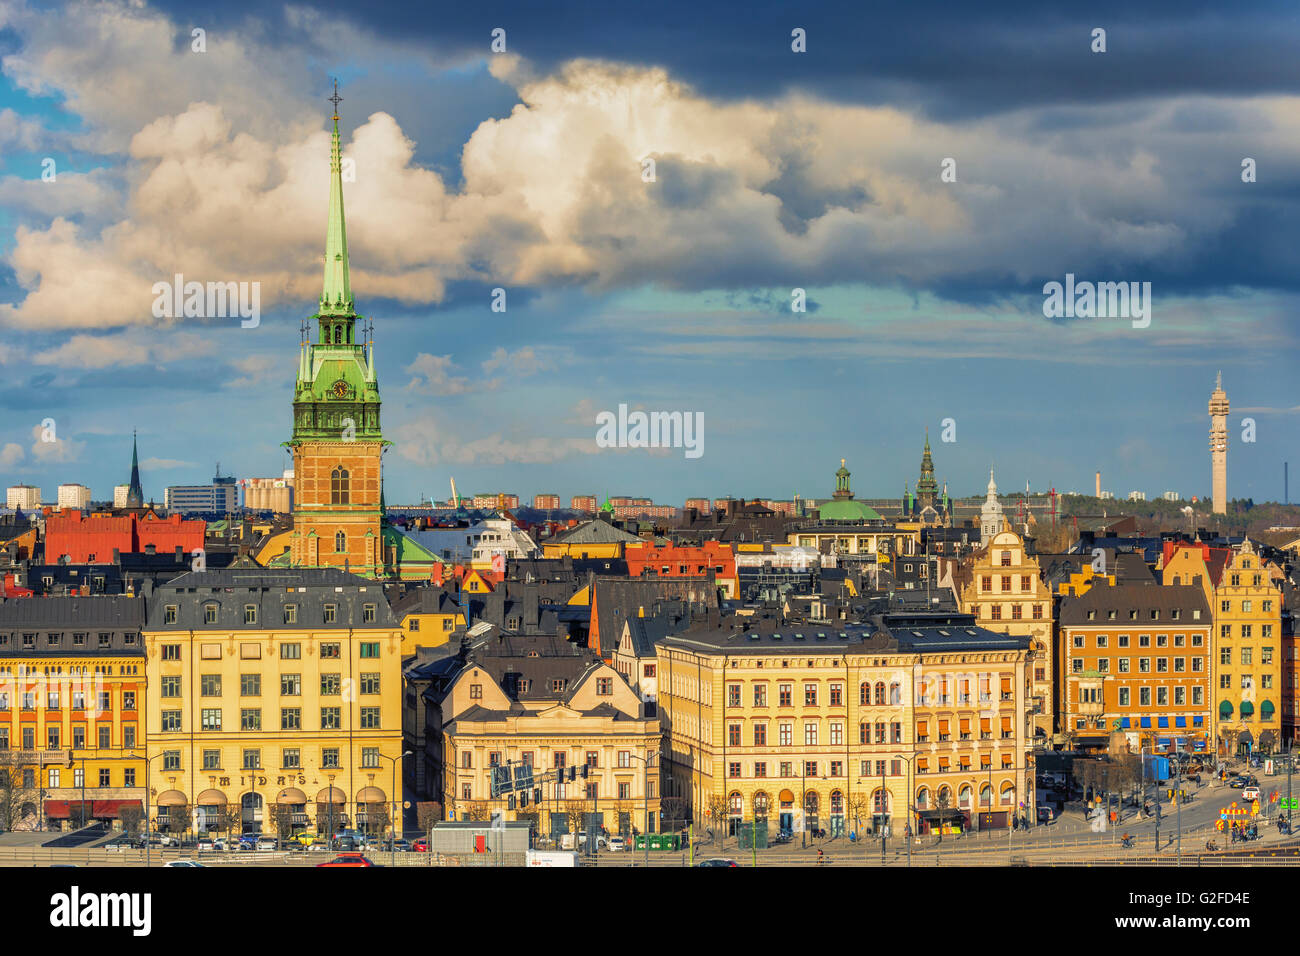 Scenic panorama of the Old Town (Gamla Stan) in Stockholm, Sweden Stock Photo